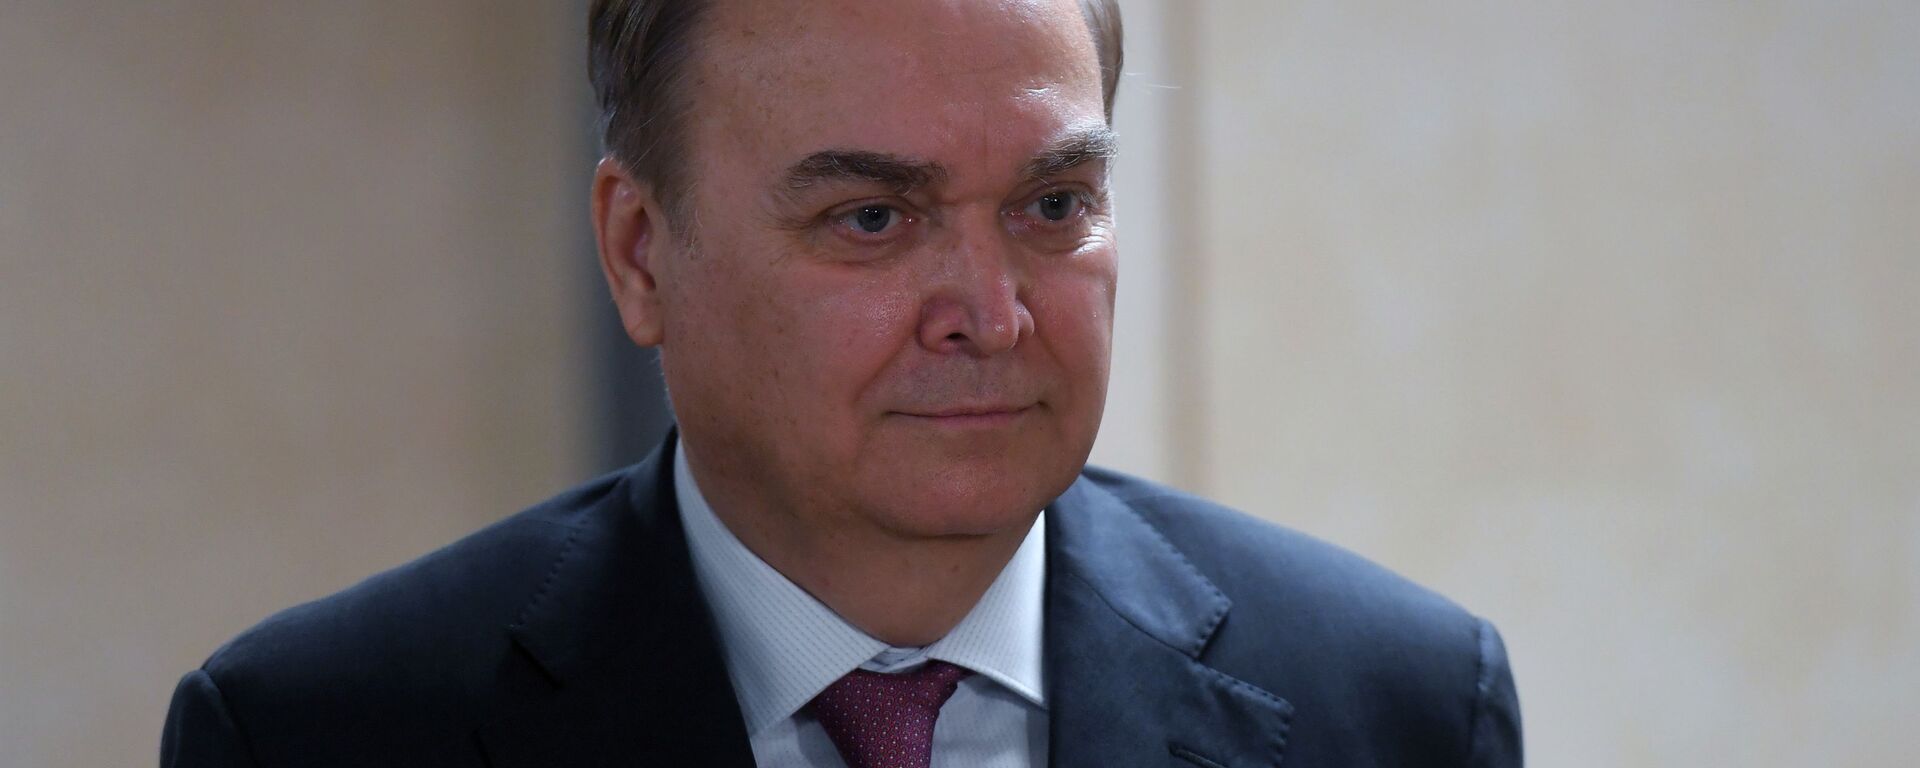 Ambassador Extraordinary and Plenipotentiary of the Russian Federation to the United States of America Anatoly Antonov during a briefing at the State Duma of the Russian Federation in Moscow. - Sputnik International, 1920, 09.04.2022